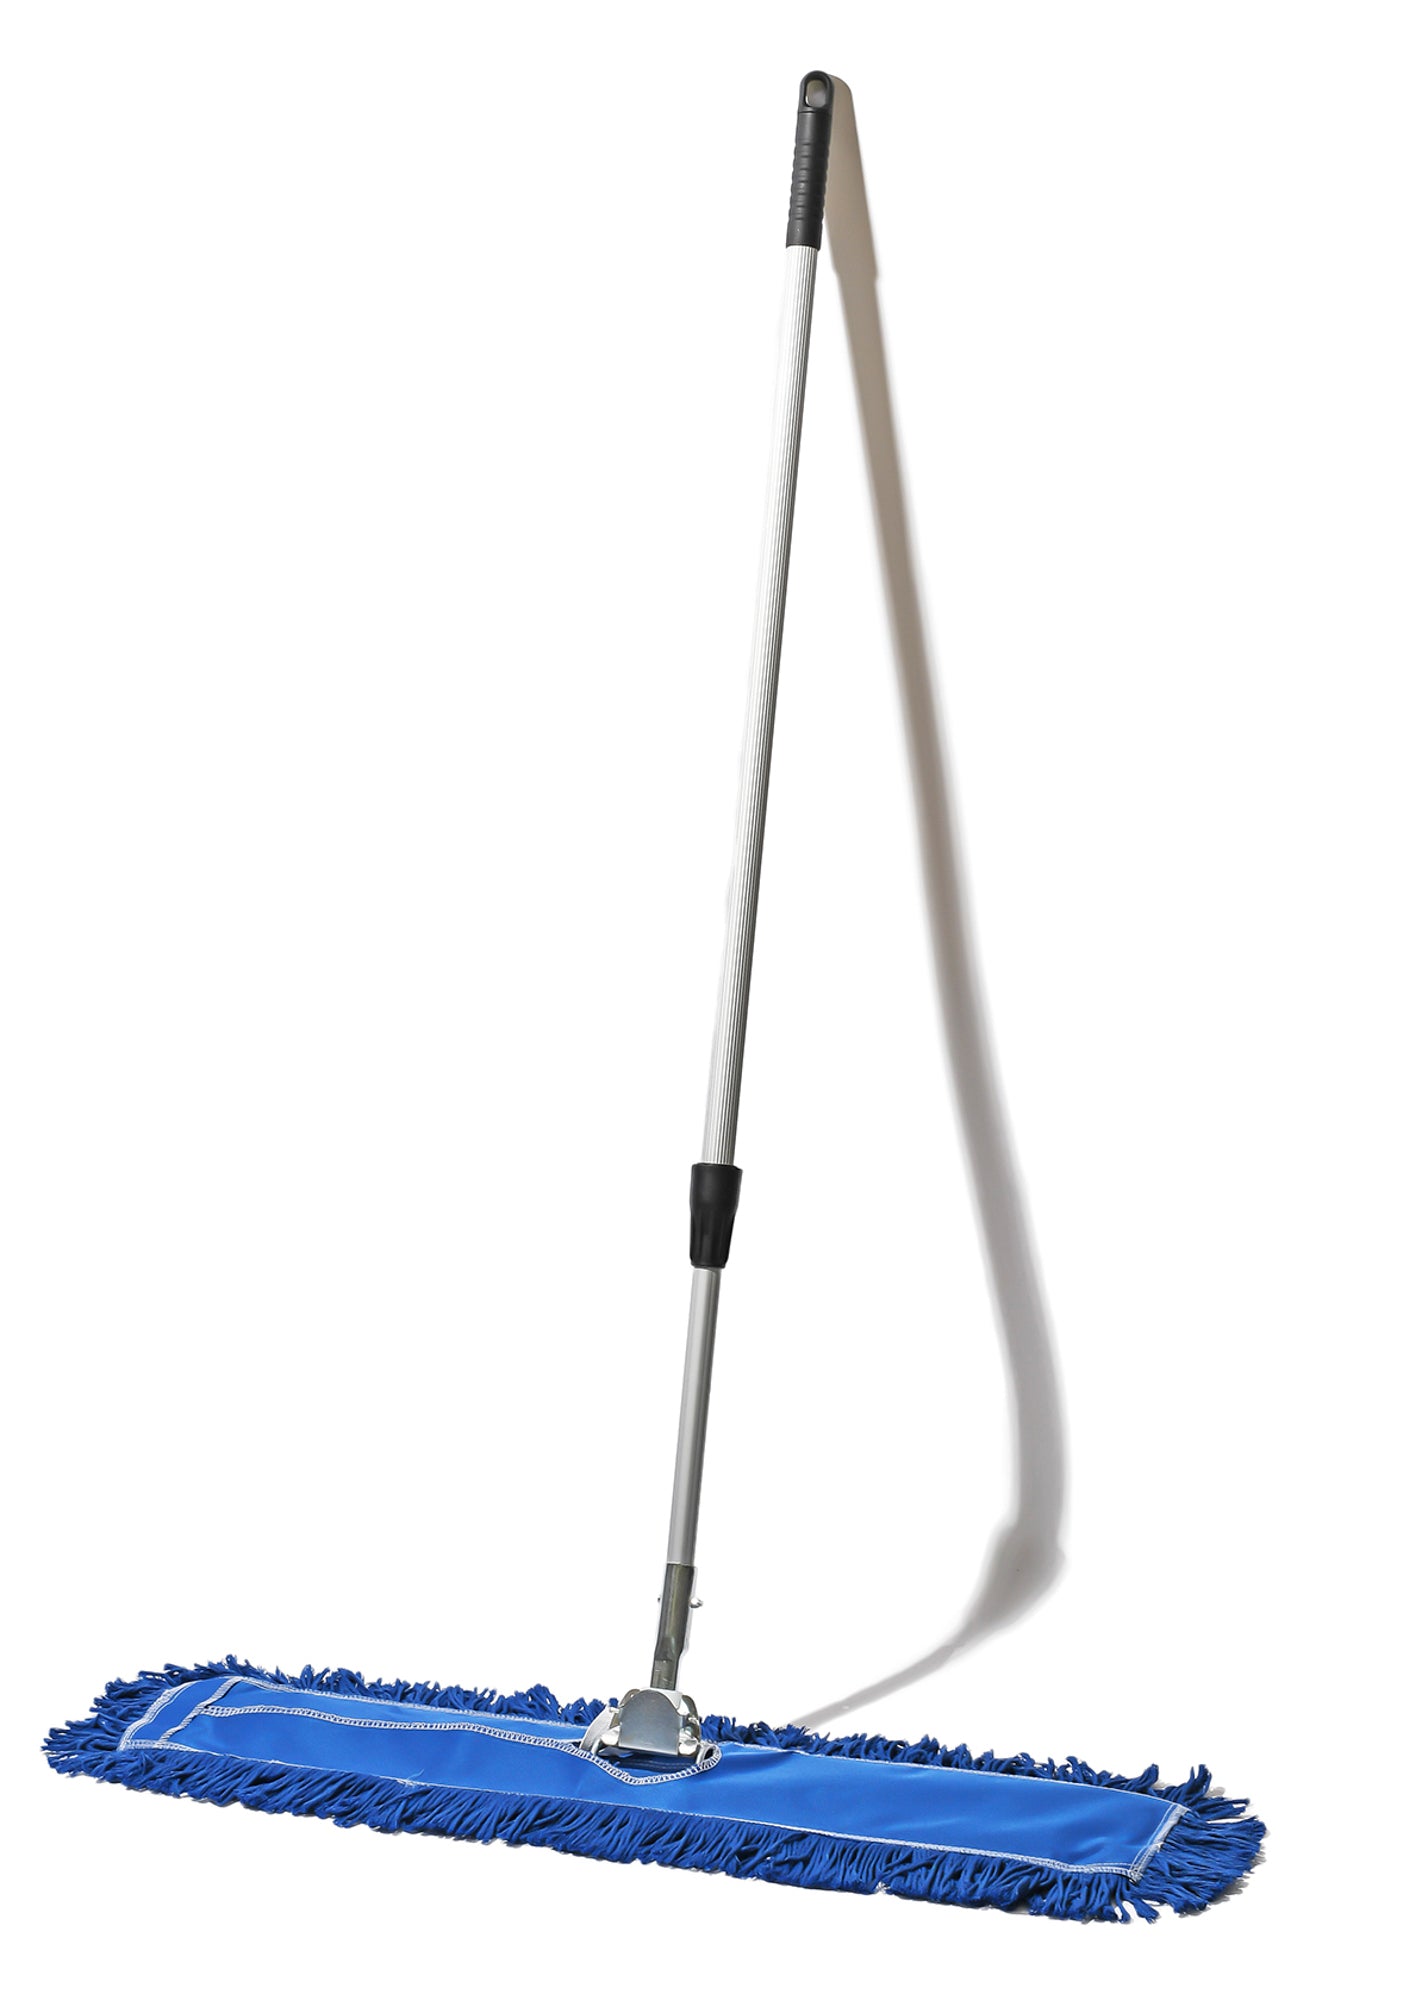 Tidy Tools 30 Inch Nylon Dust Mop Extendable Handle